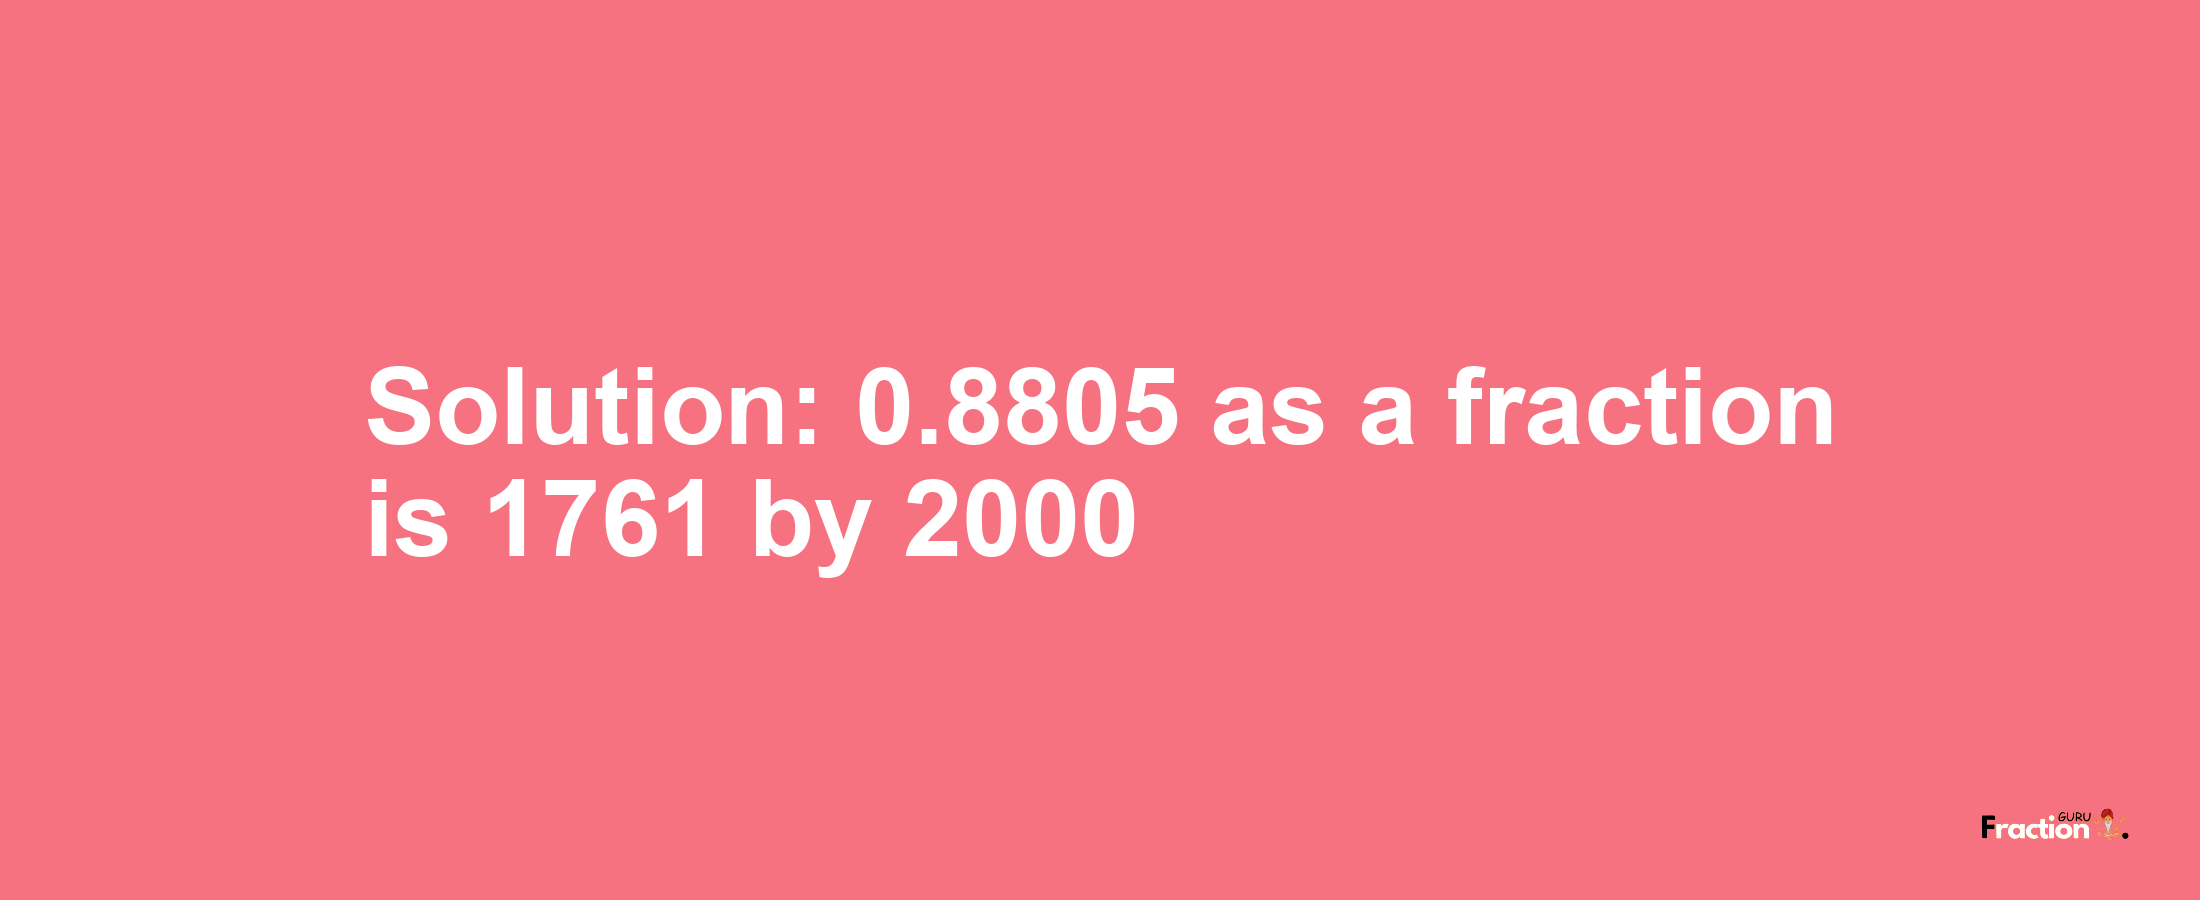 Solution:0.8805 as a fraction is 1761/2000